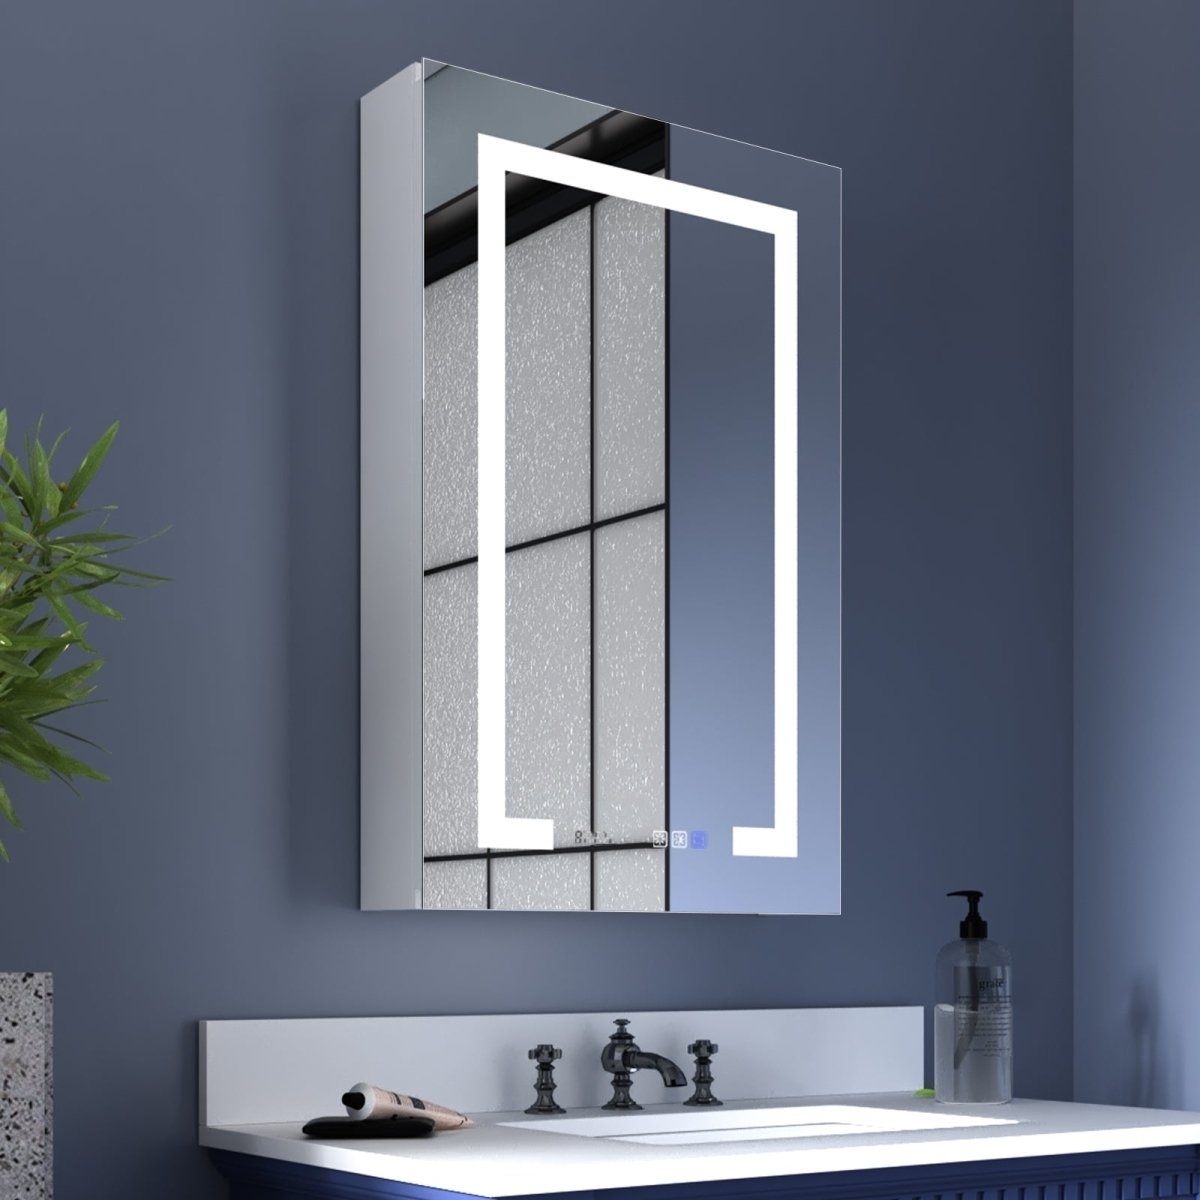 Boost-M2 20 W X 32 H Bathroom Narrow Light Medicine Cabinets With Vanity Mirror Recessed Or Surface - Hinge On Right Side